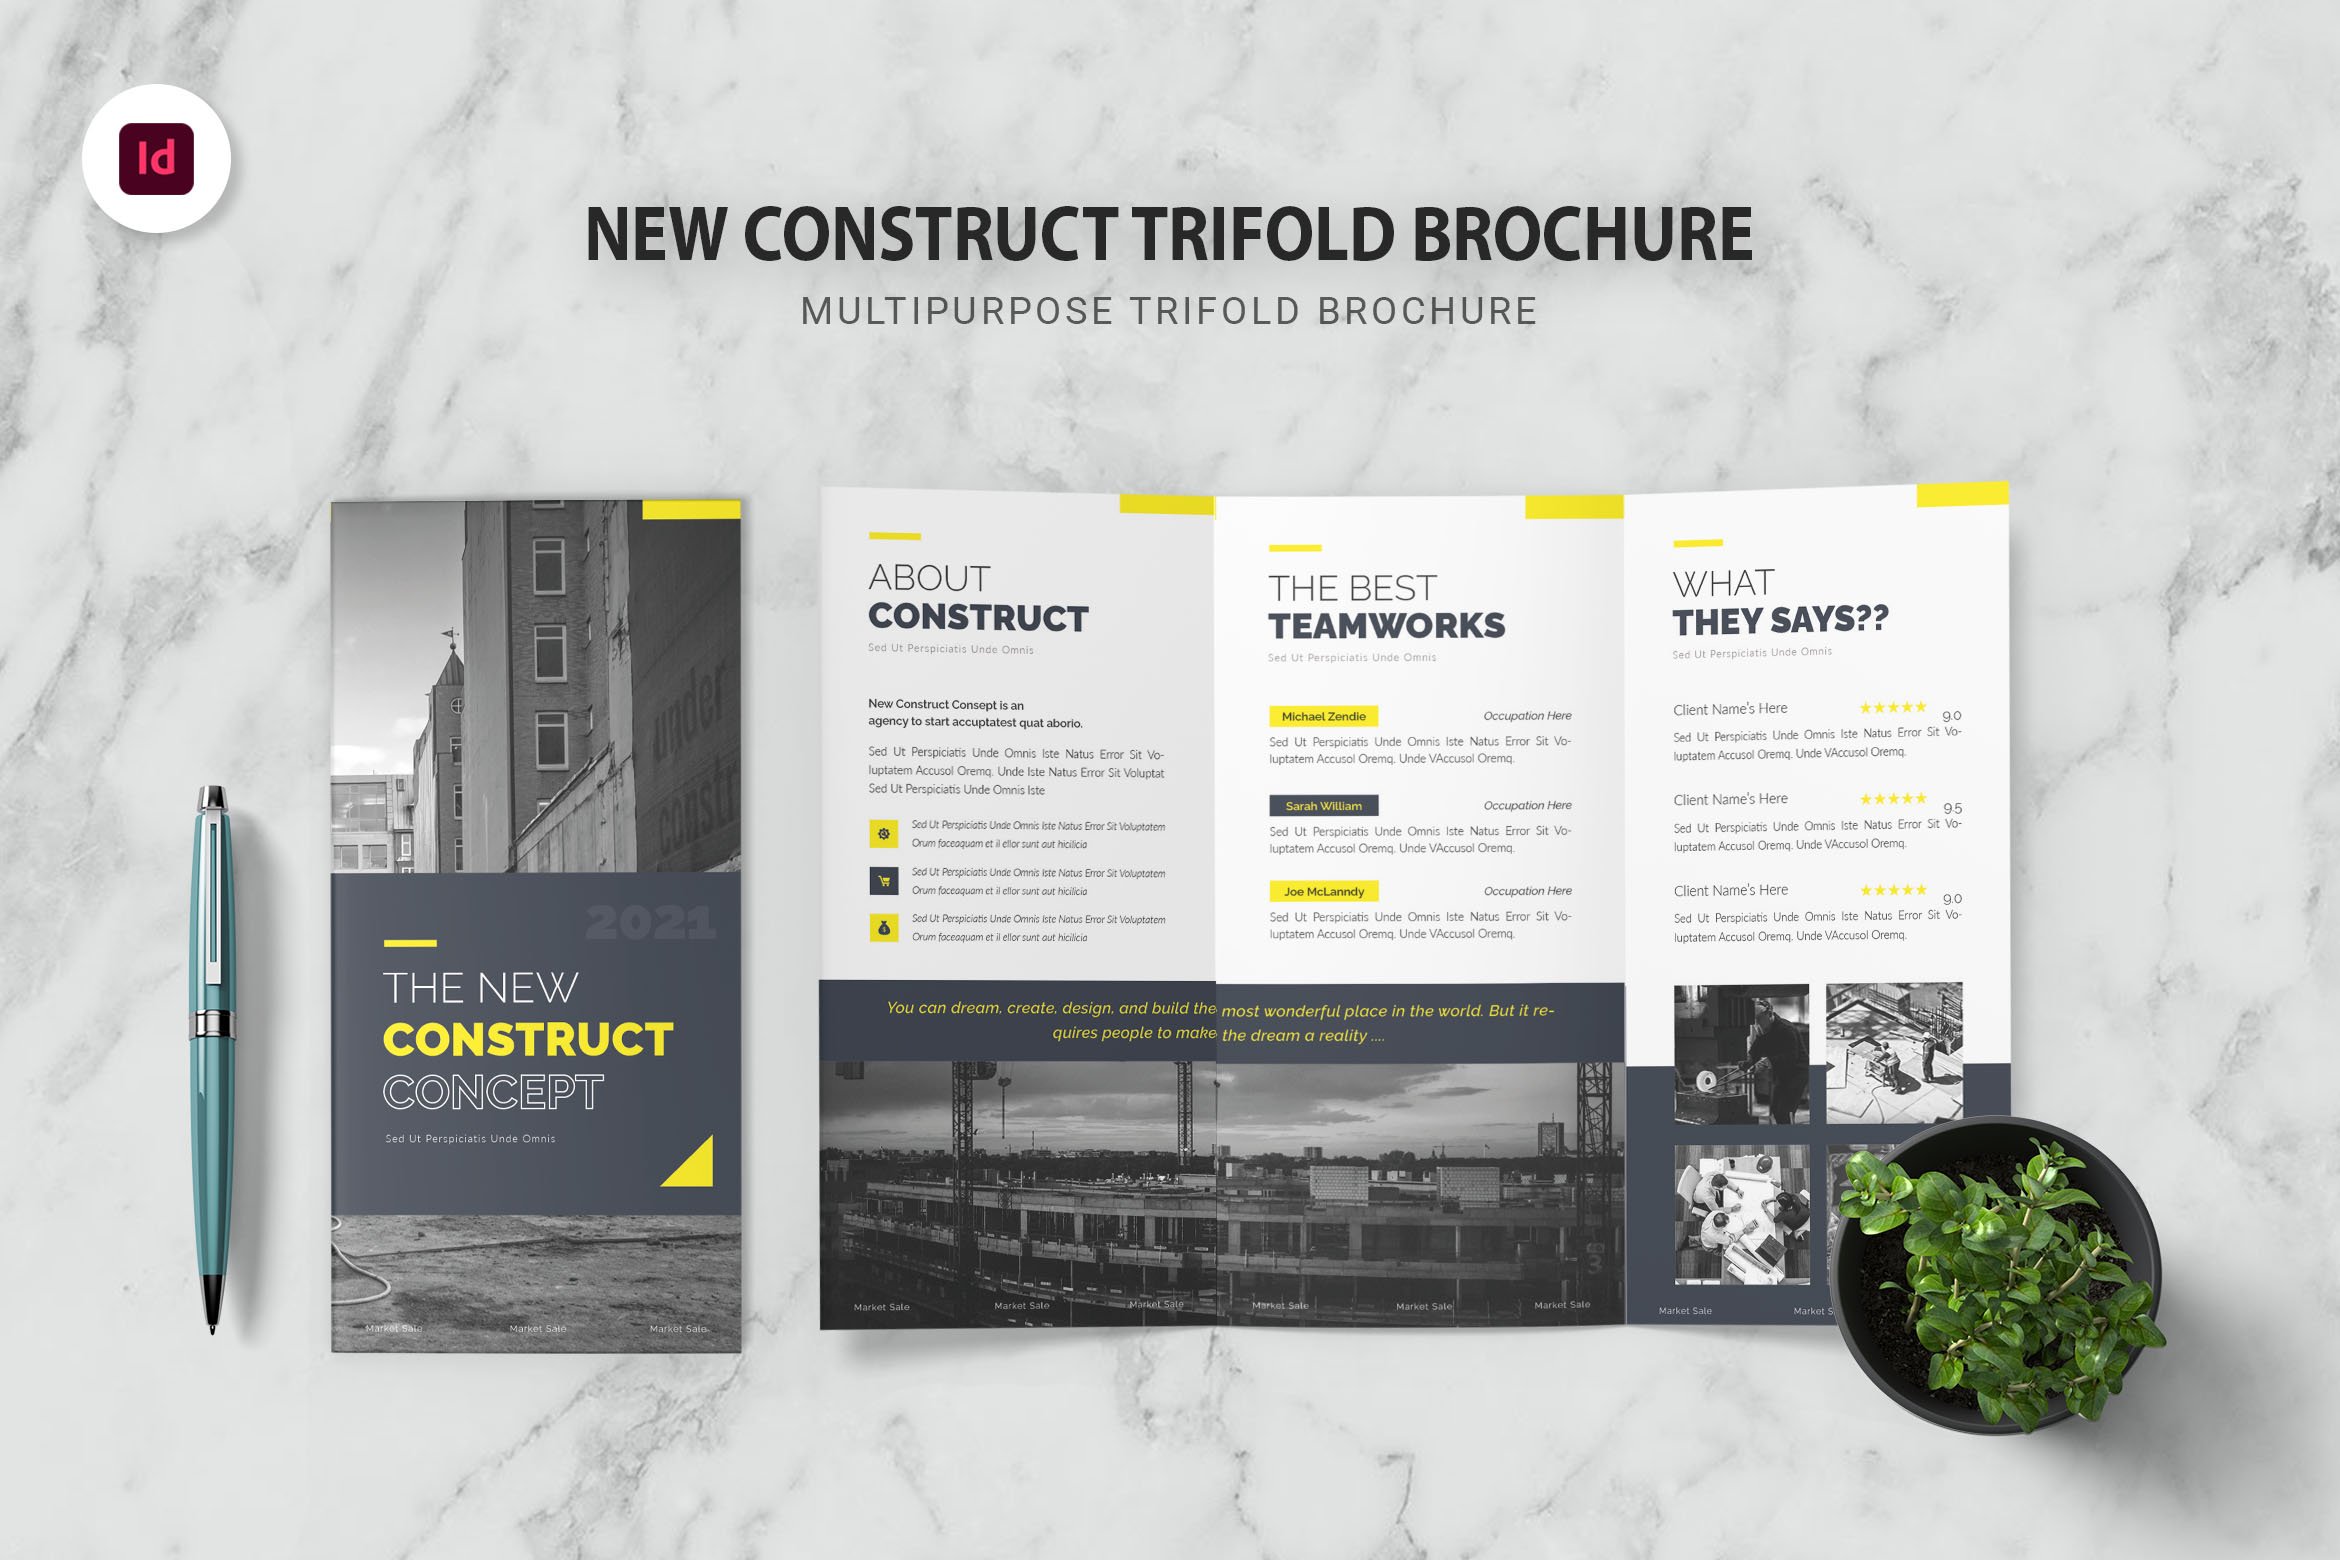 Construct Concept Trifold Brochure cover image.